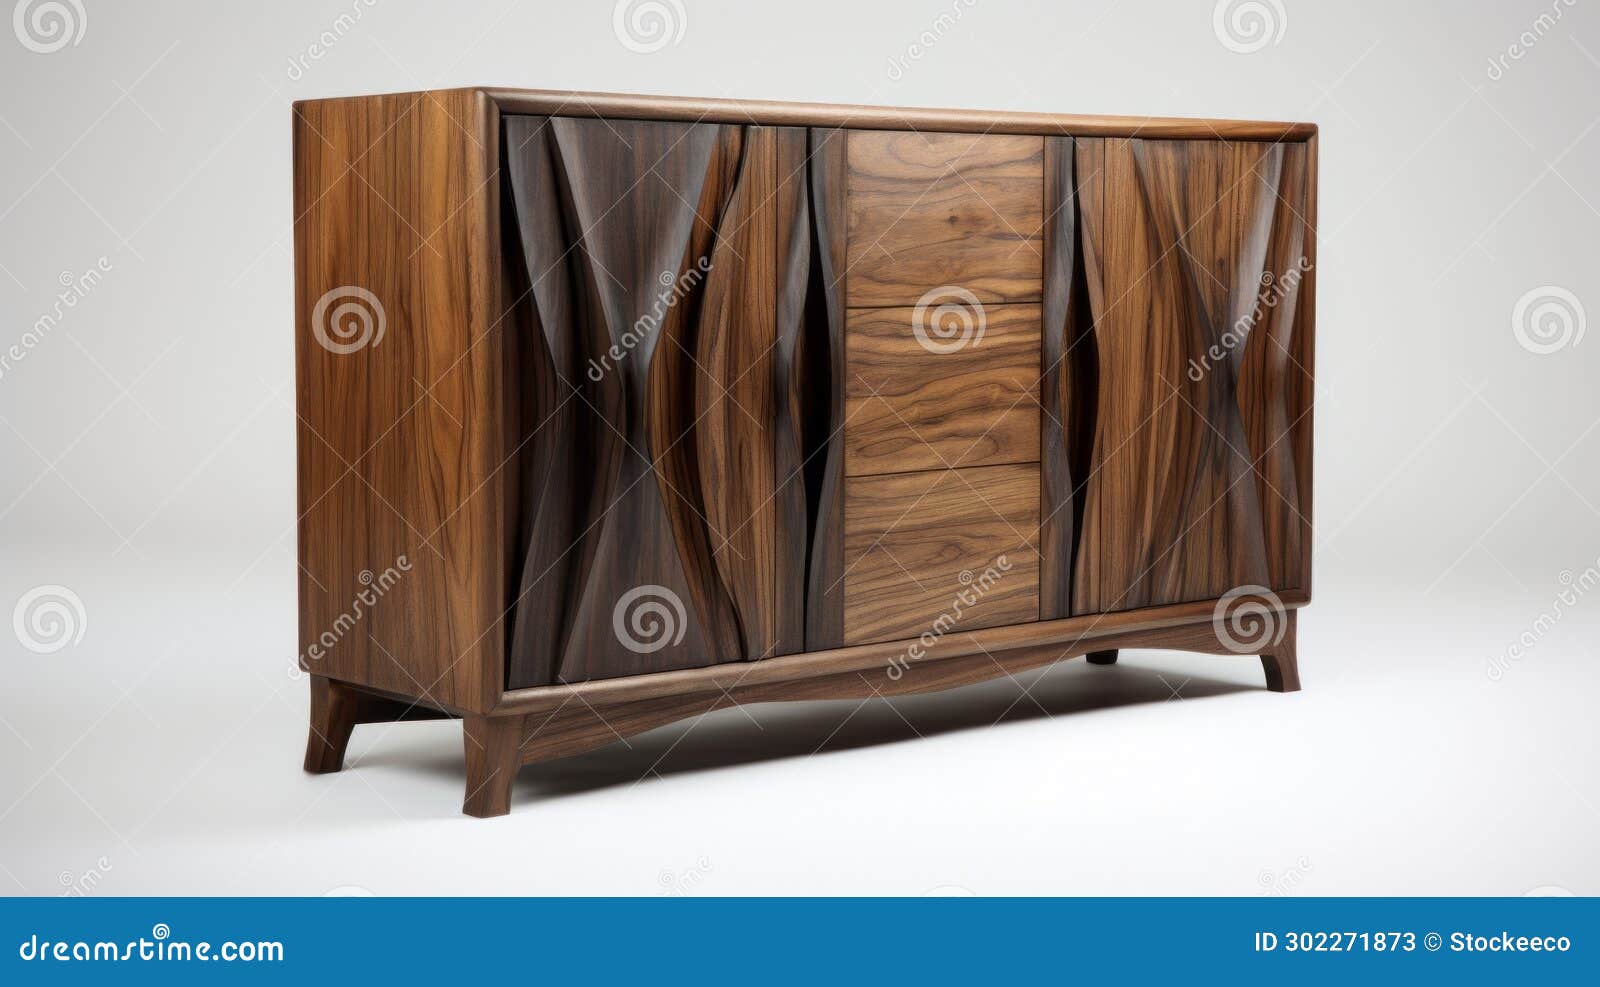 midcentury modern walnut sideboard with wavy lines and organic s